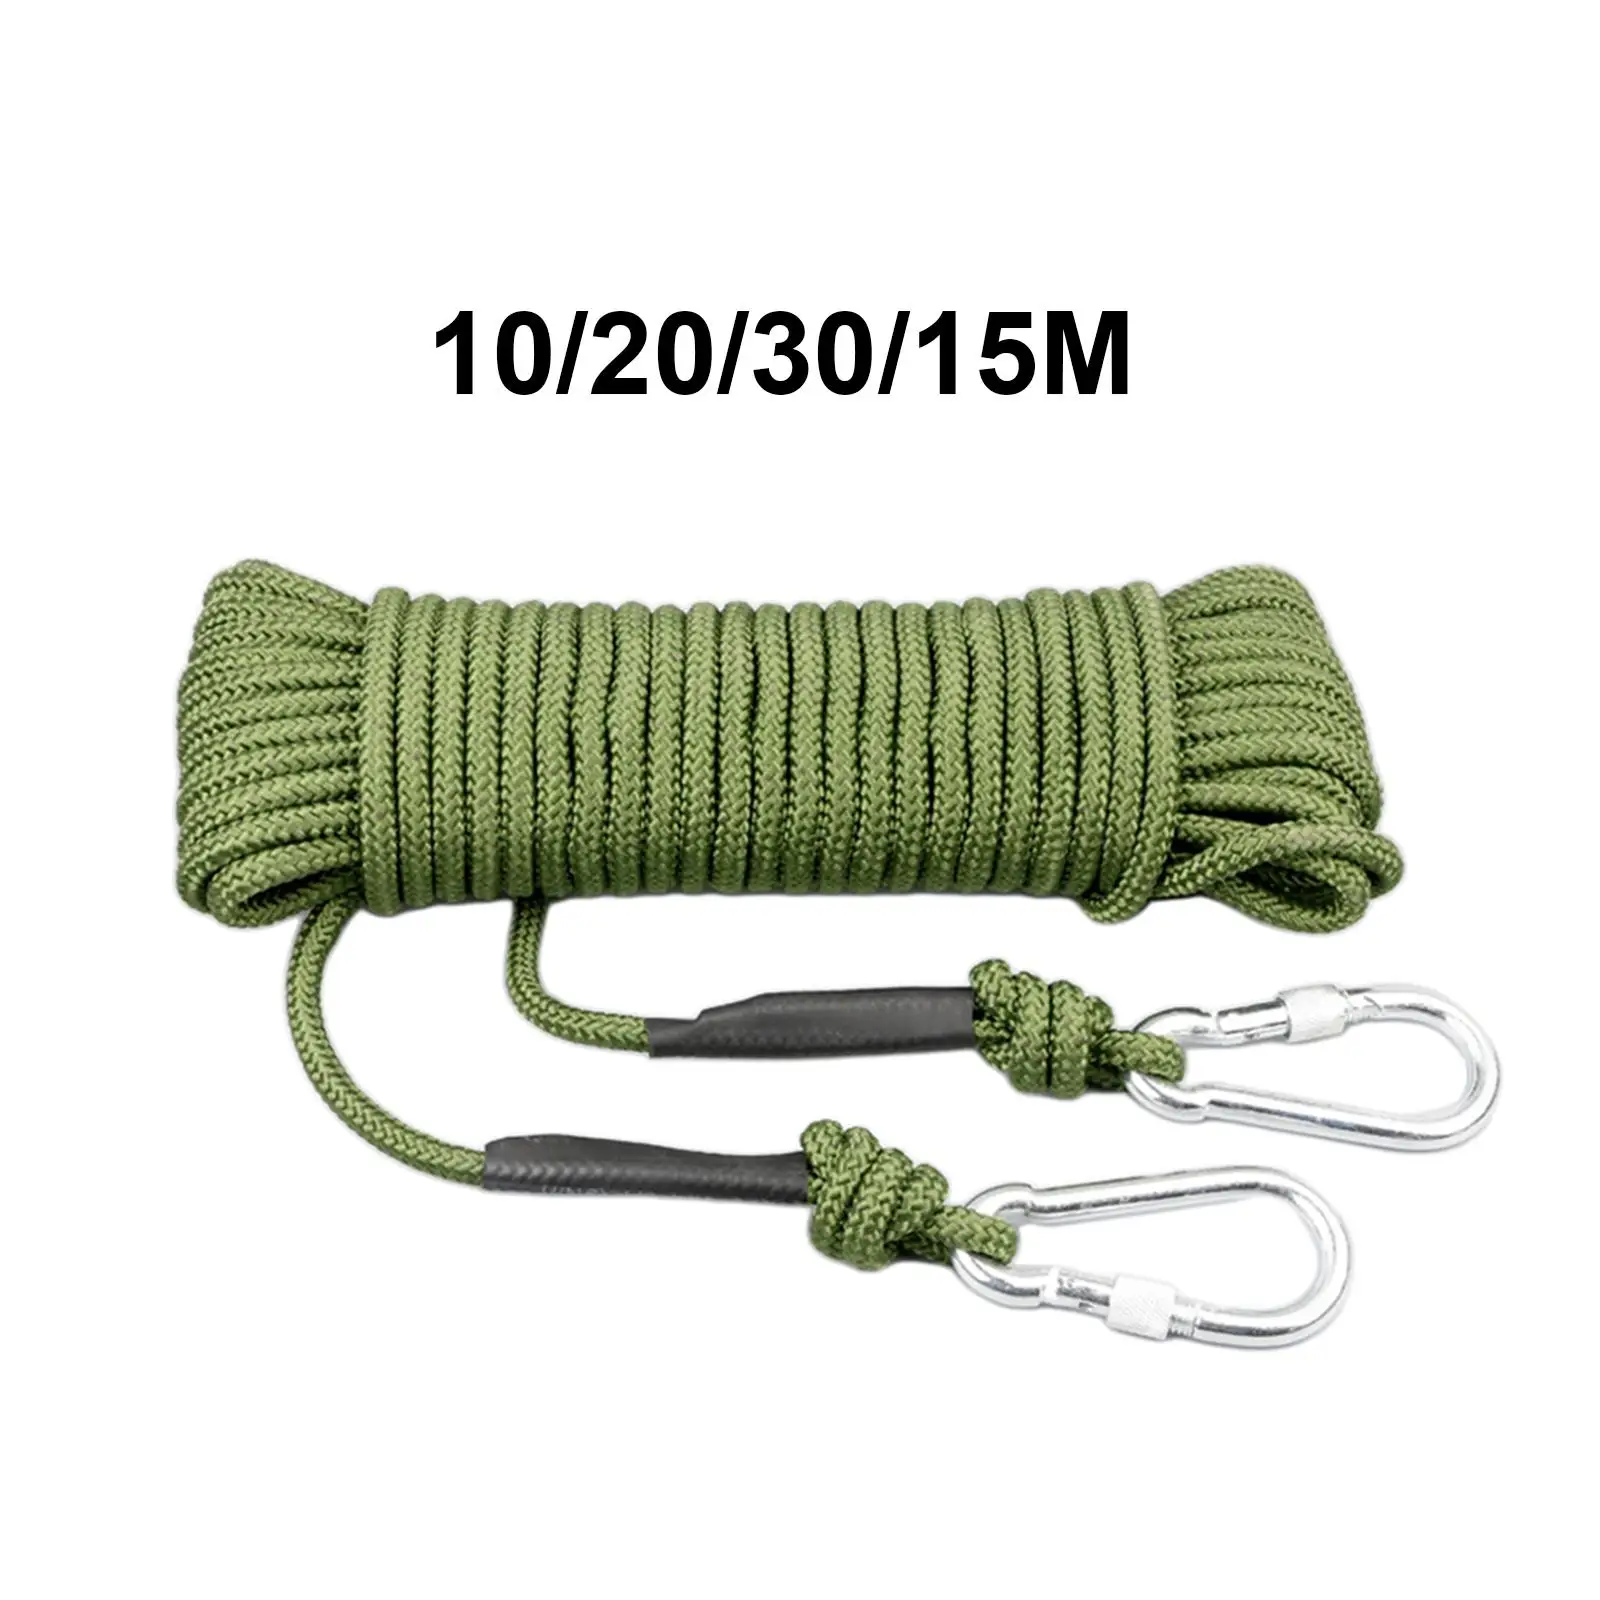 Outdoor Rock Climbing Rope Fire Escape Equipment with Steel Wire Hooks Green Lanyard Core Gear for Emergency Ice Climbing Hiking